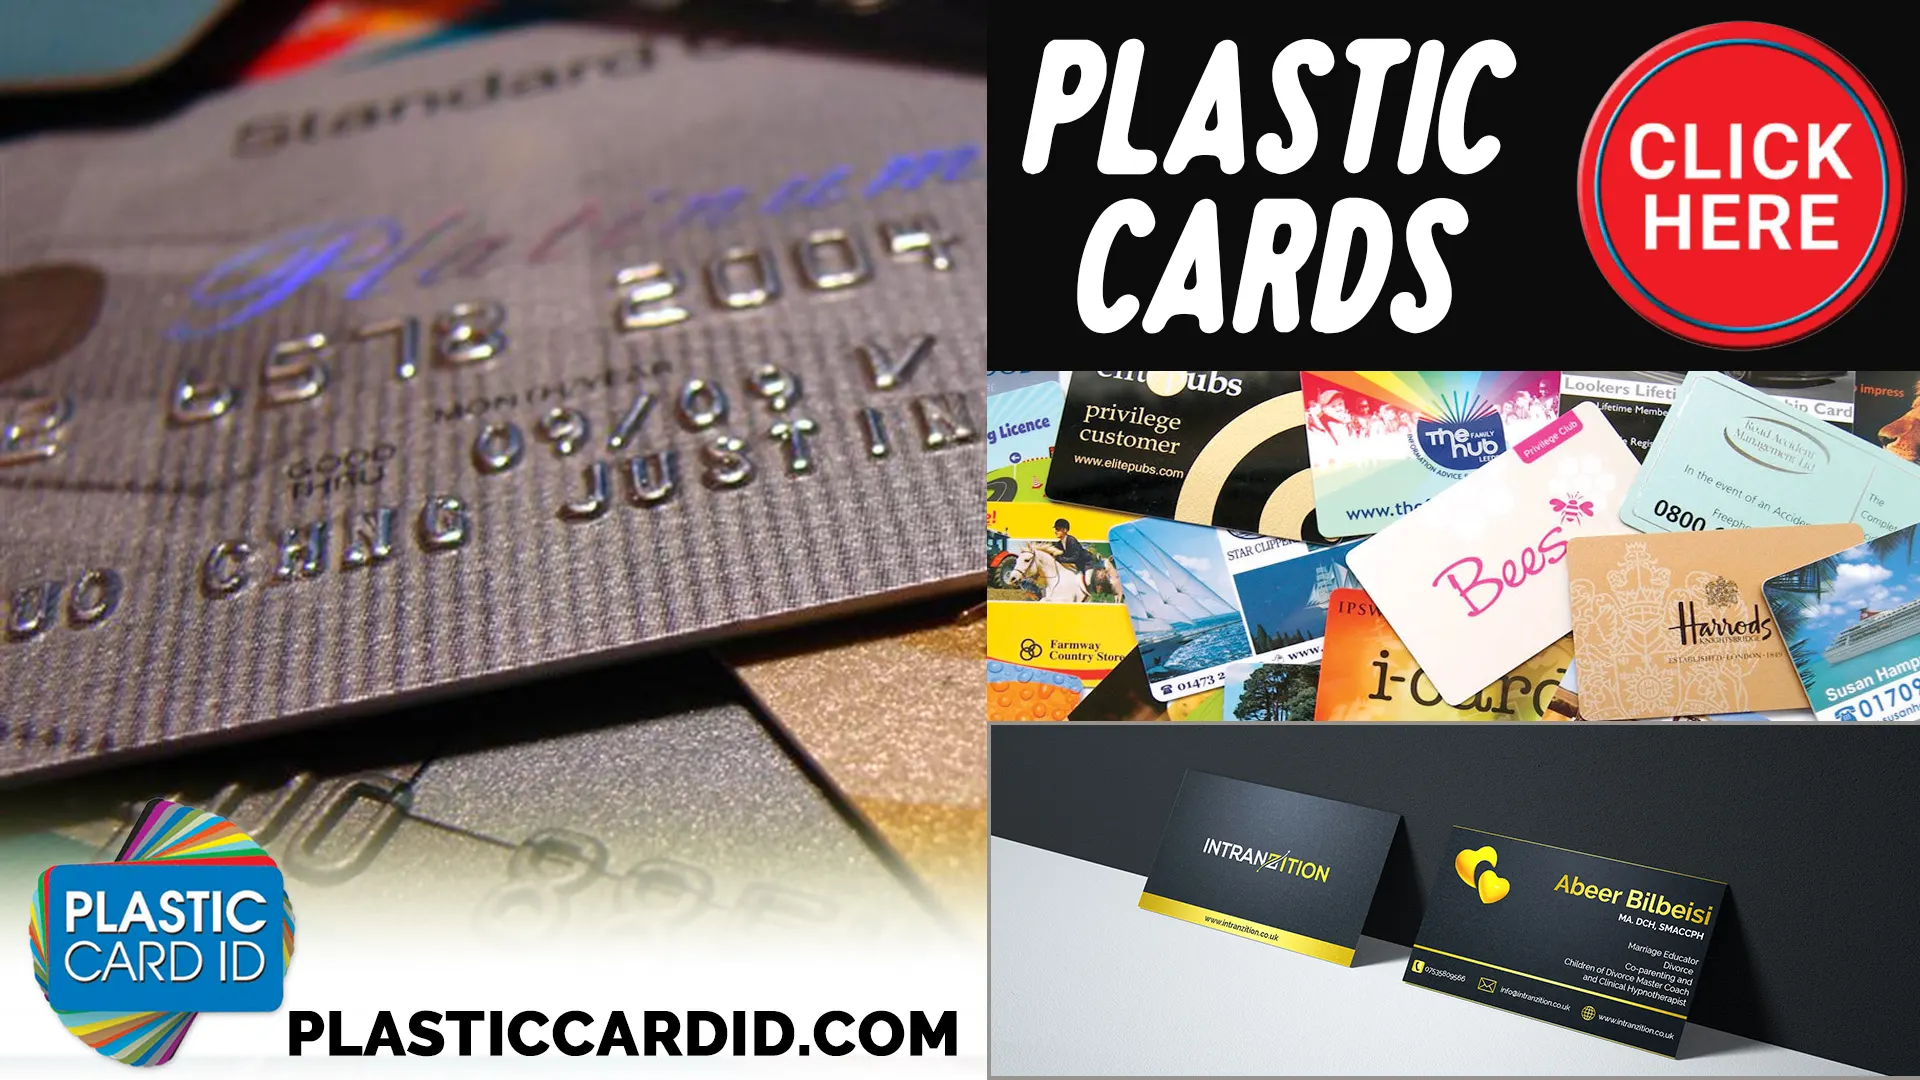 Welcome to the World of Enhanced Security and Style with Our Plastic Cards